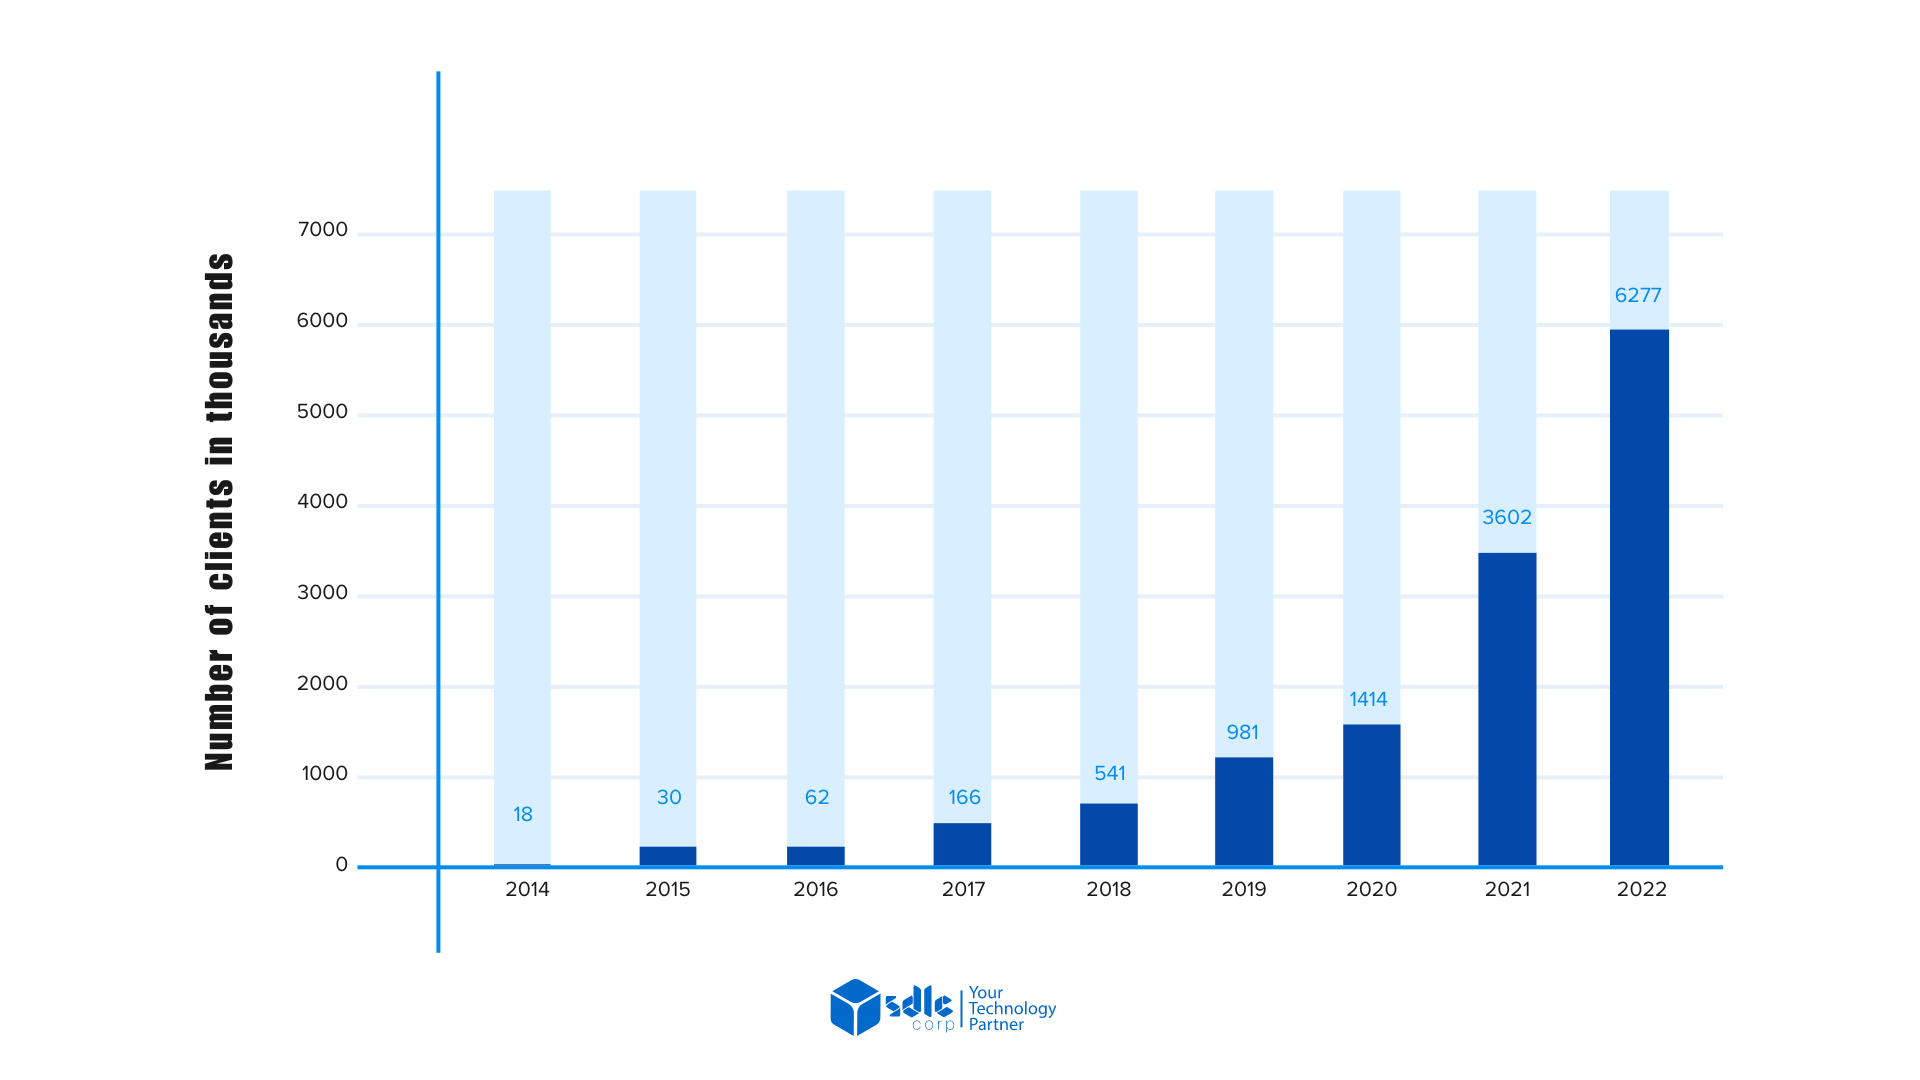 Number of active clients with Zerodha from the financial year 2014 to 2022